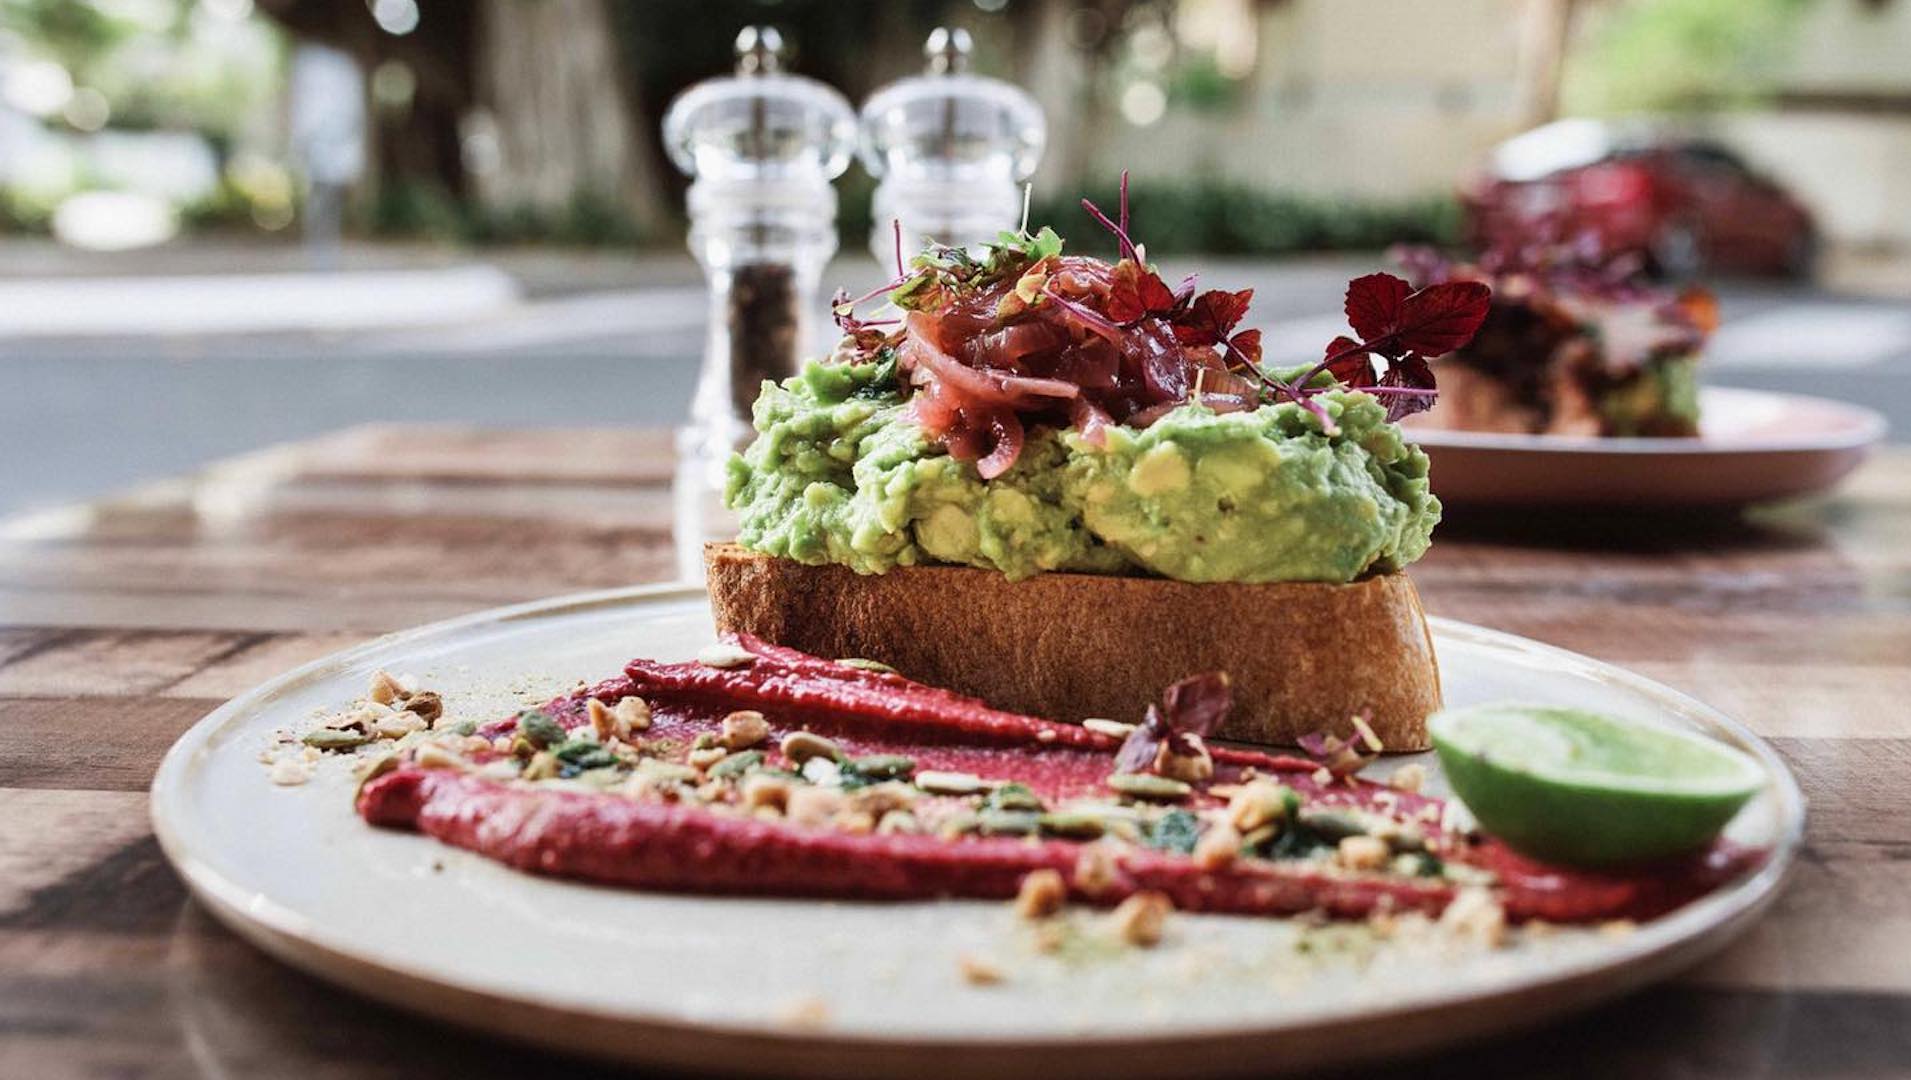 cafes in queensland wiht gluten-free menus: smashed avocado at The Witchin' Kitchen